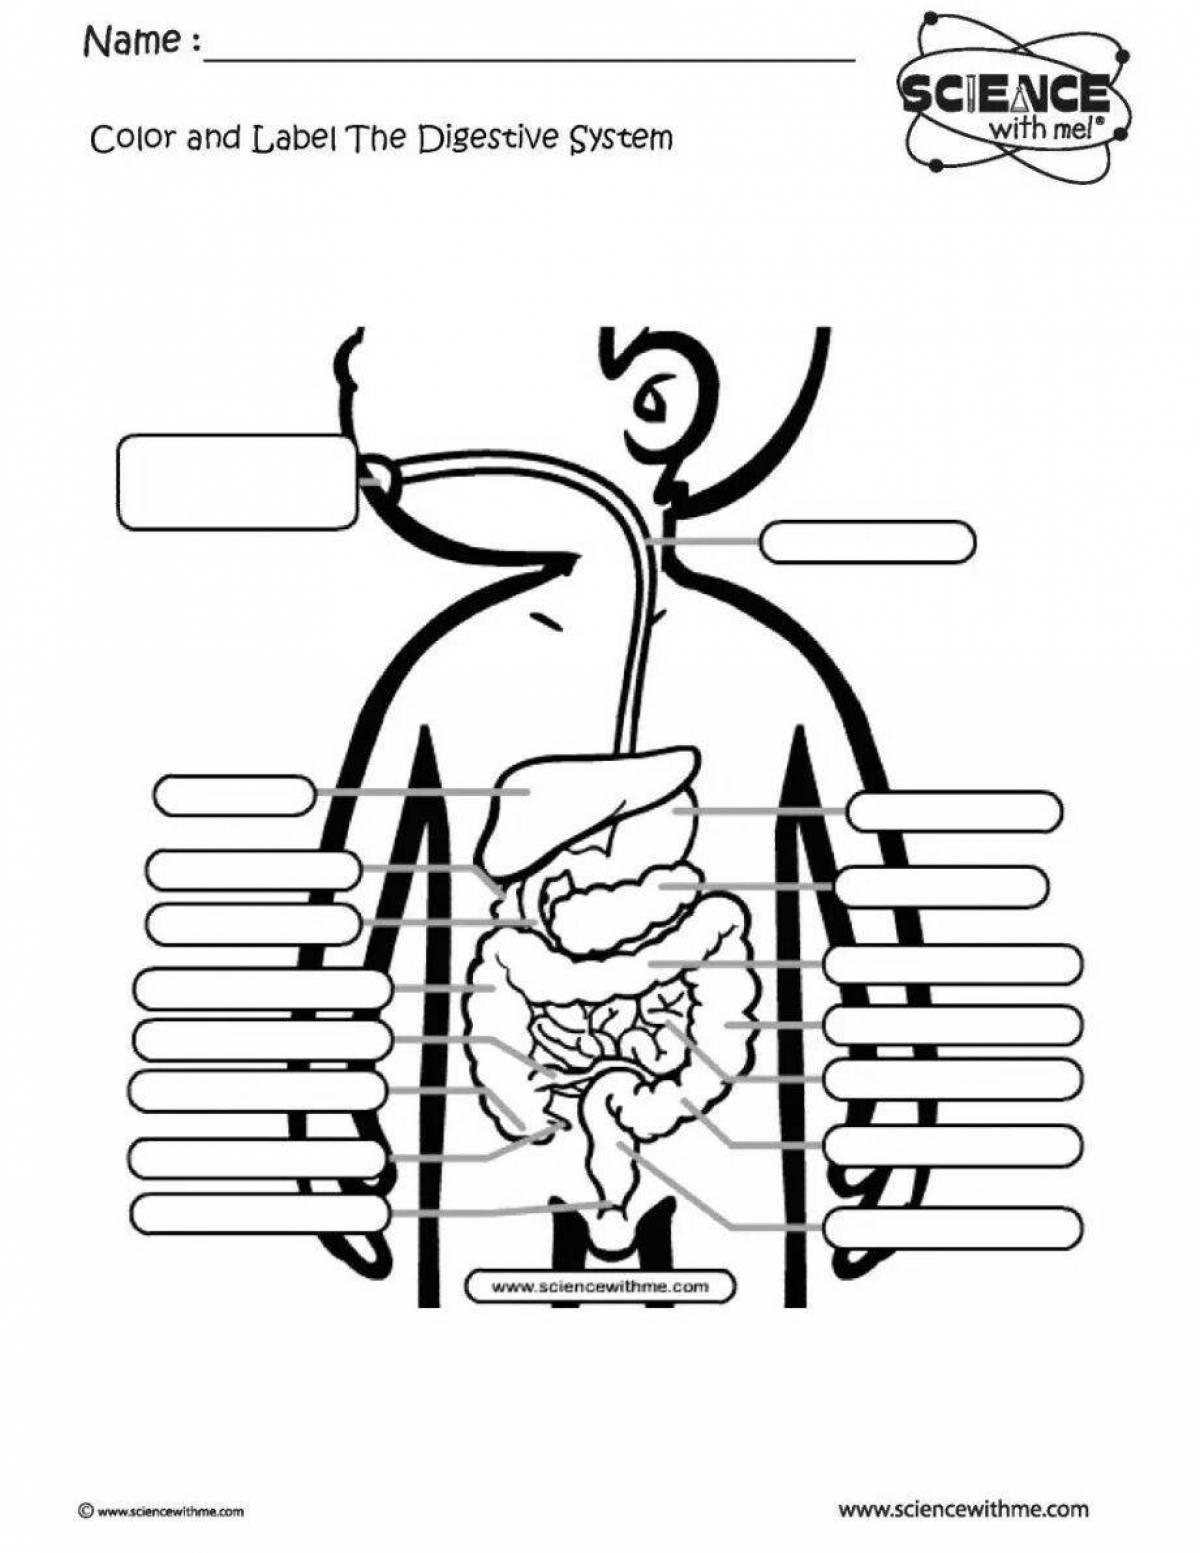 Digestive system coloring page